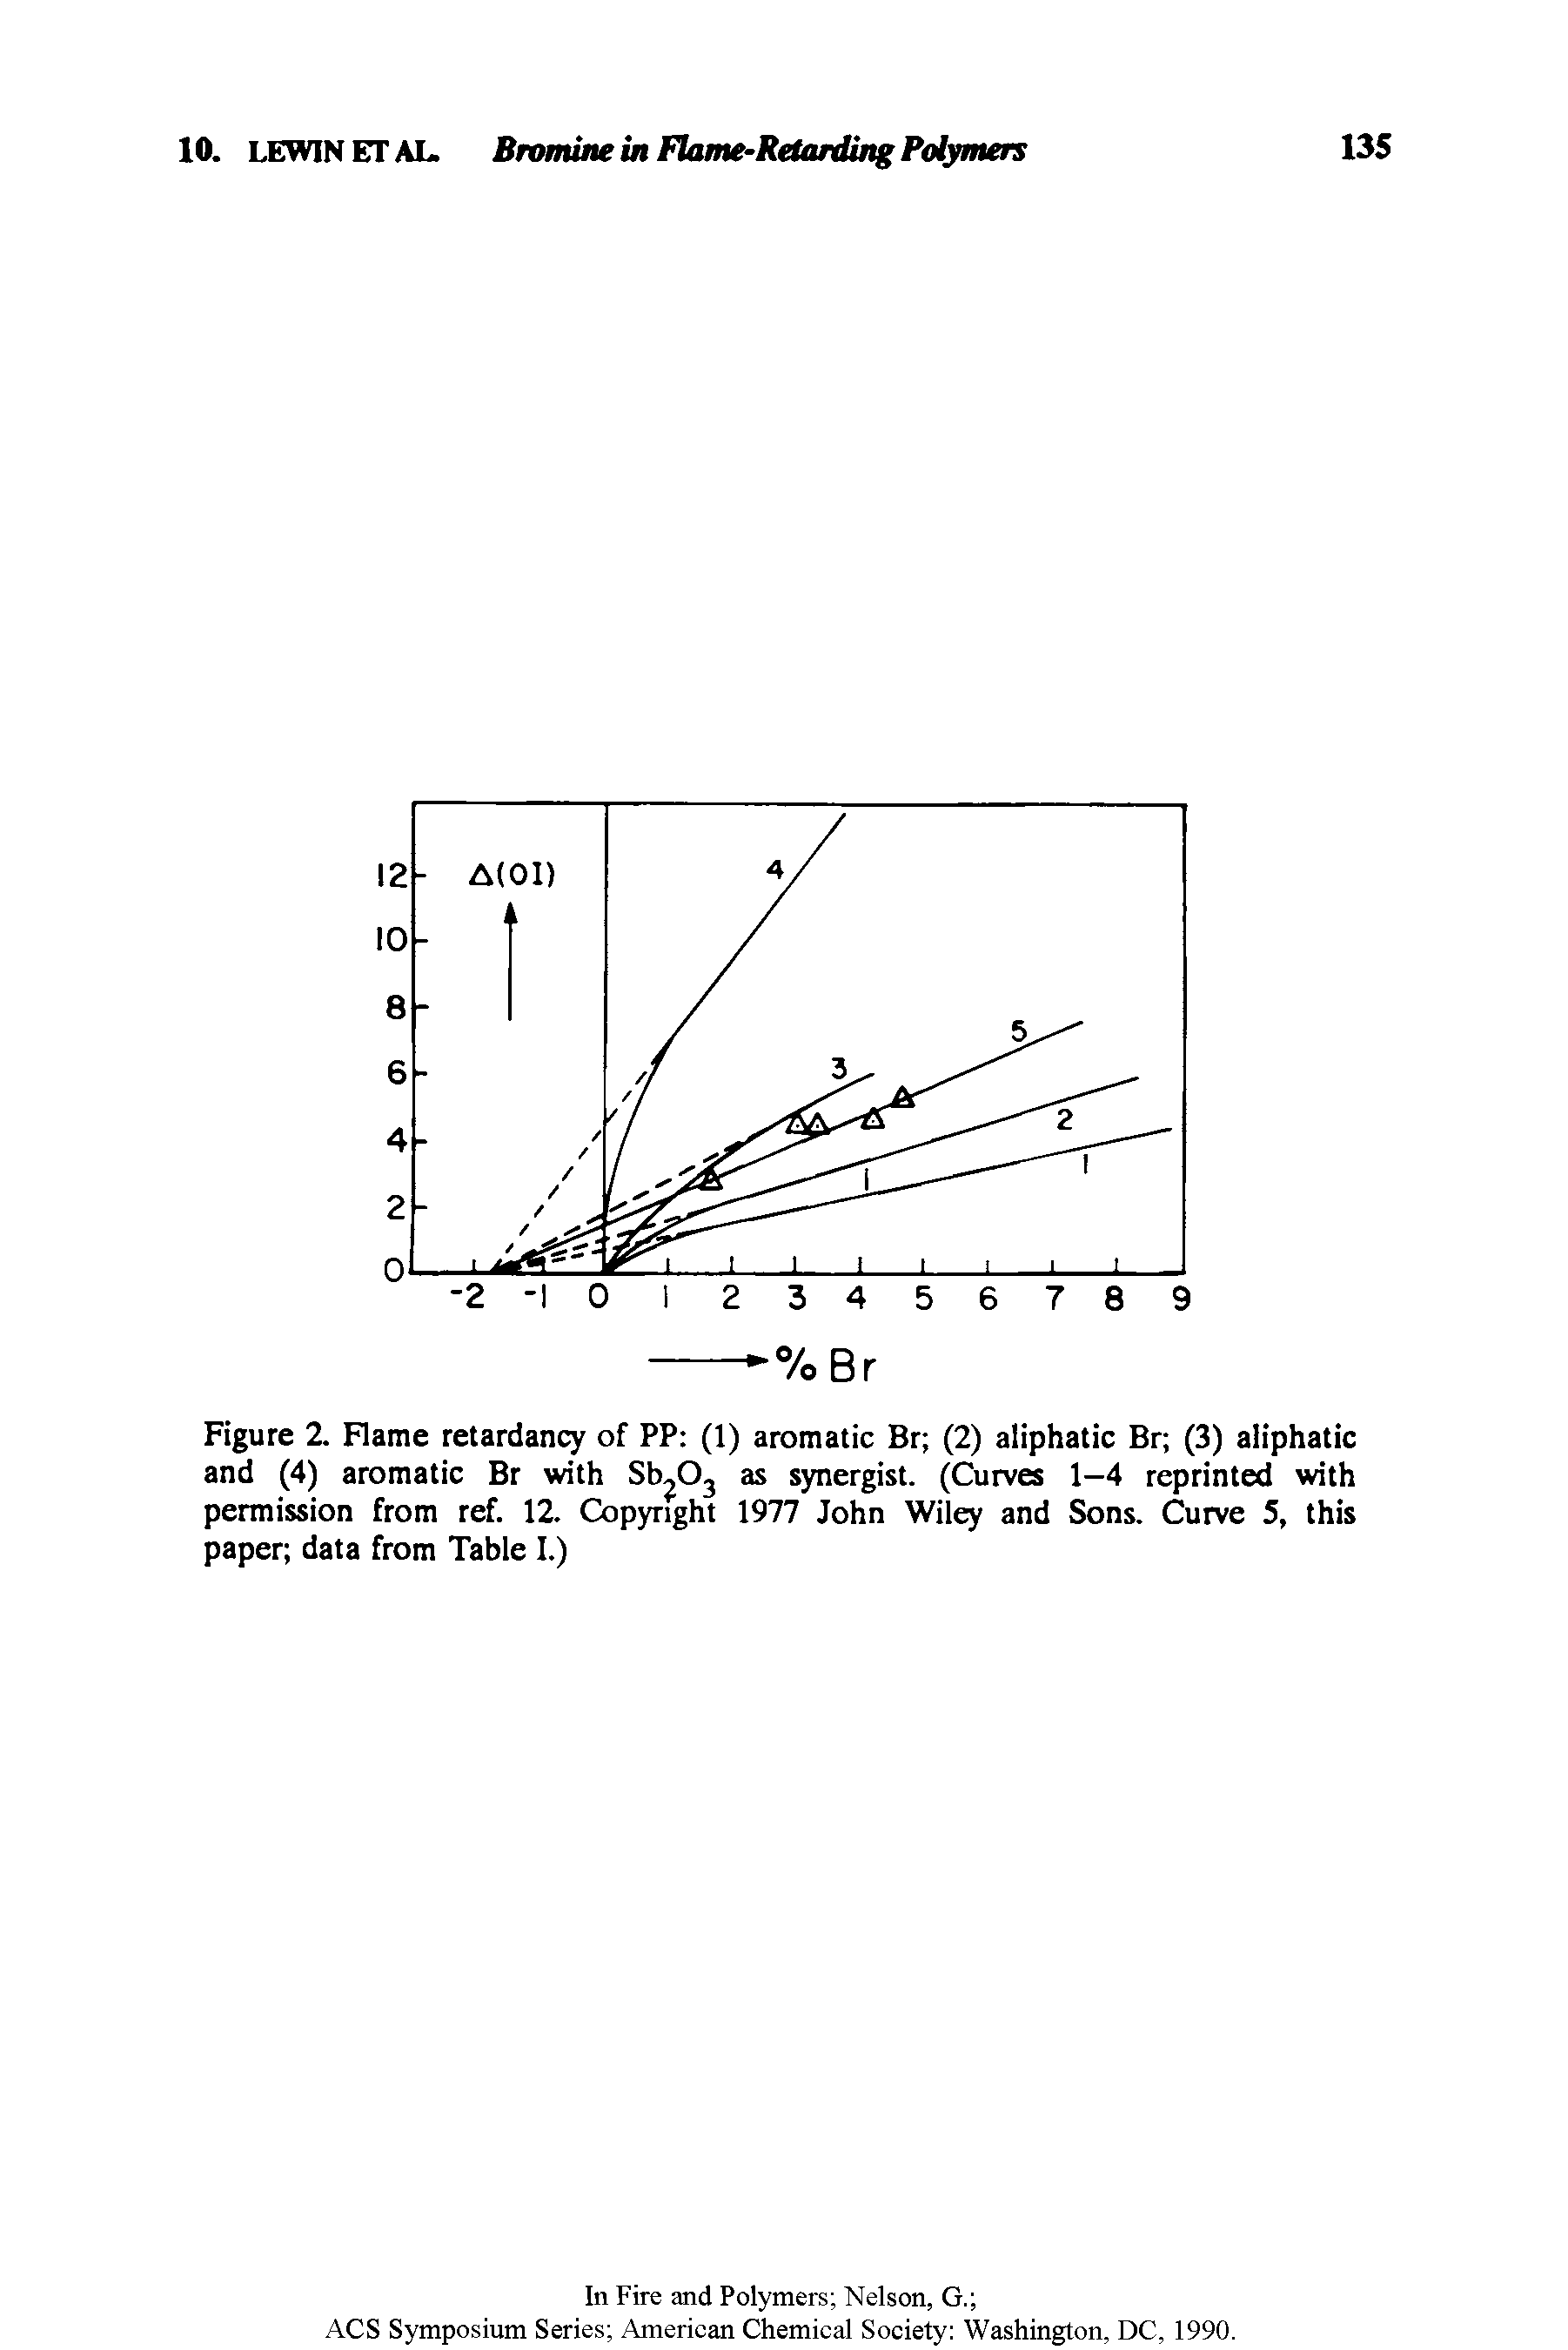 Figure 2. Flame retardancy of PP (1) aromatic Br (2) aliphatic Br (3) aliphatic and (4) aromatic Br with Sb 03 as synergist. (Curves 1-4 reprinted with permission from ref. 12. Copyright 1977 John Wiley and Sons. Curve 5, this paper data from Table I.)...